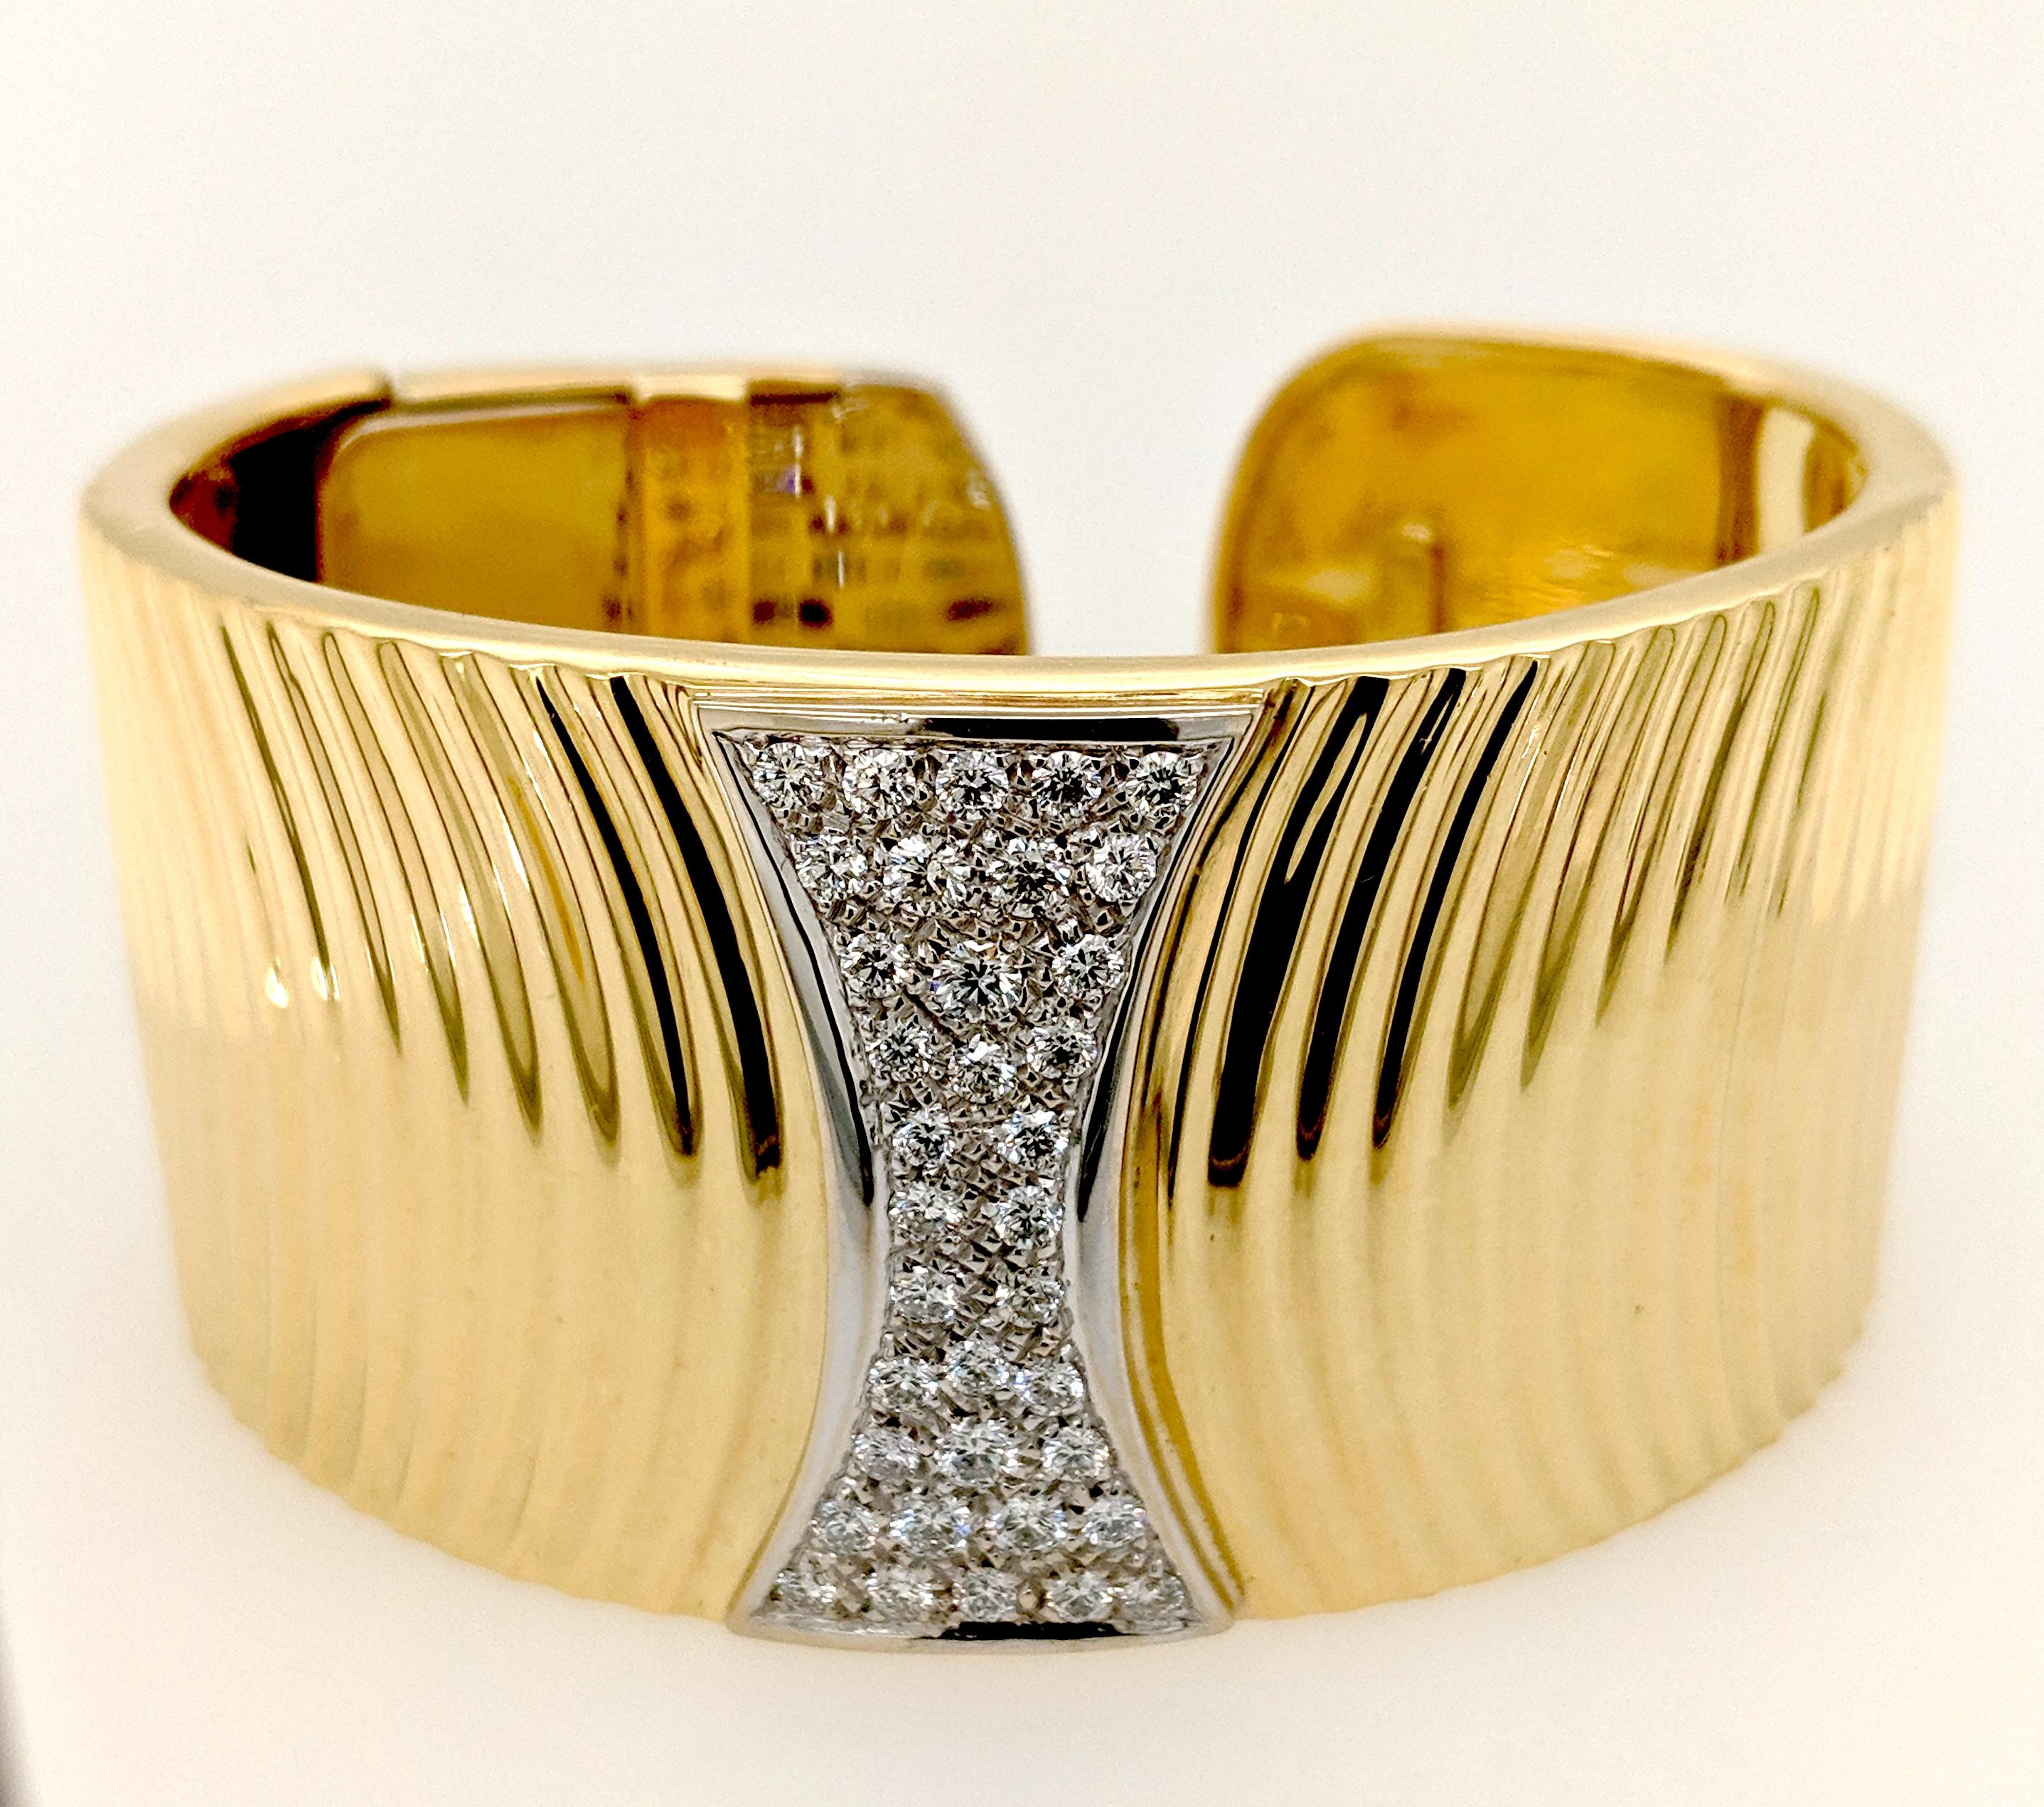 The Diamond cuff bracelet designed by Sal Praschnik is crafted in 18 karat yellow gold and features (37) round diamonds weighing 1.41cttw with a color of G/H and a clarity of SI1. The bracelet is 1, 1/4